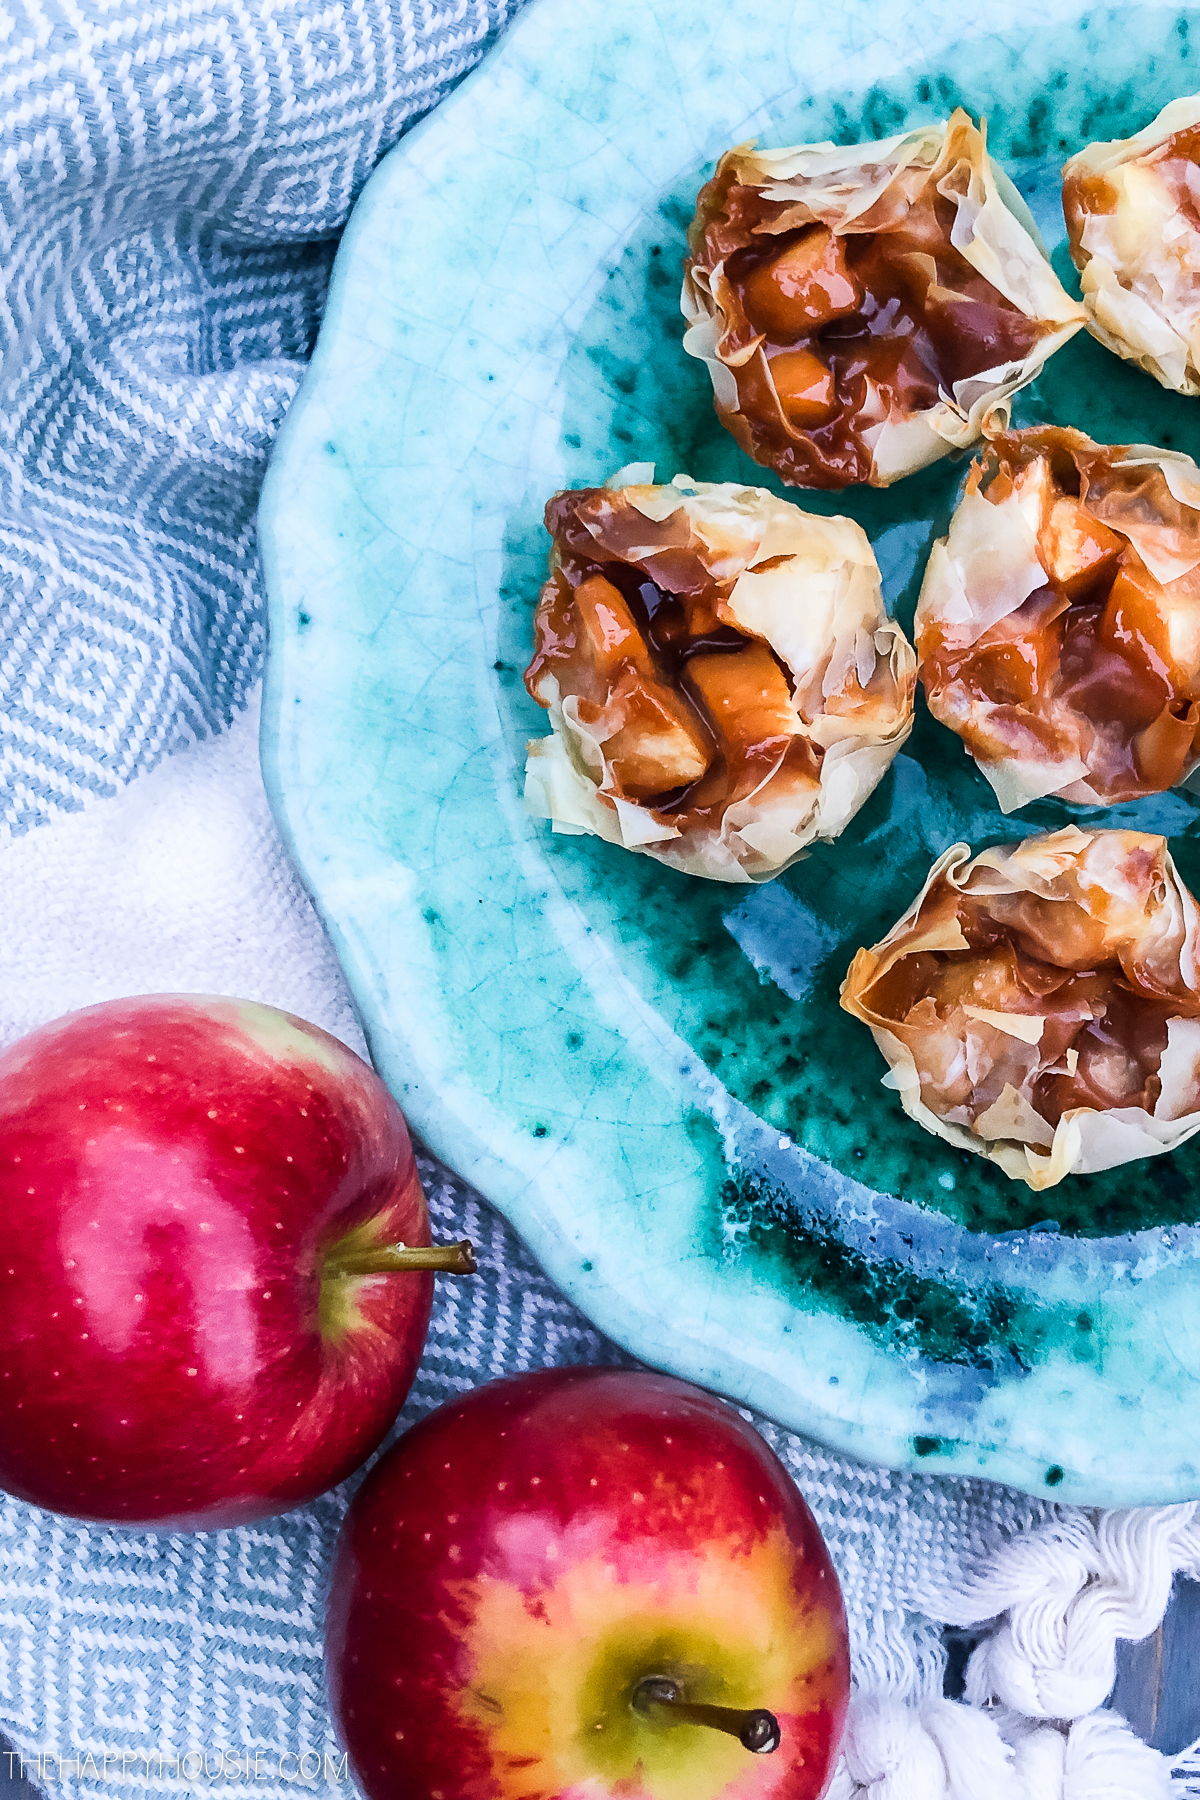 The phyllo bites on a plate with two apples beside it.